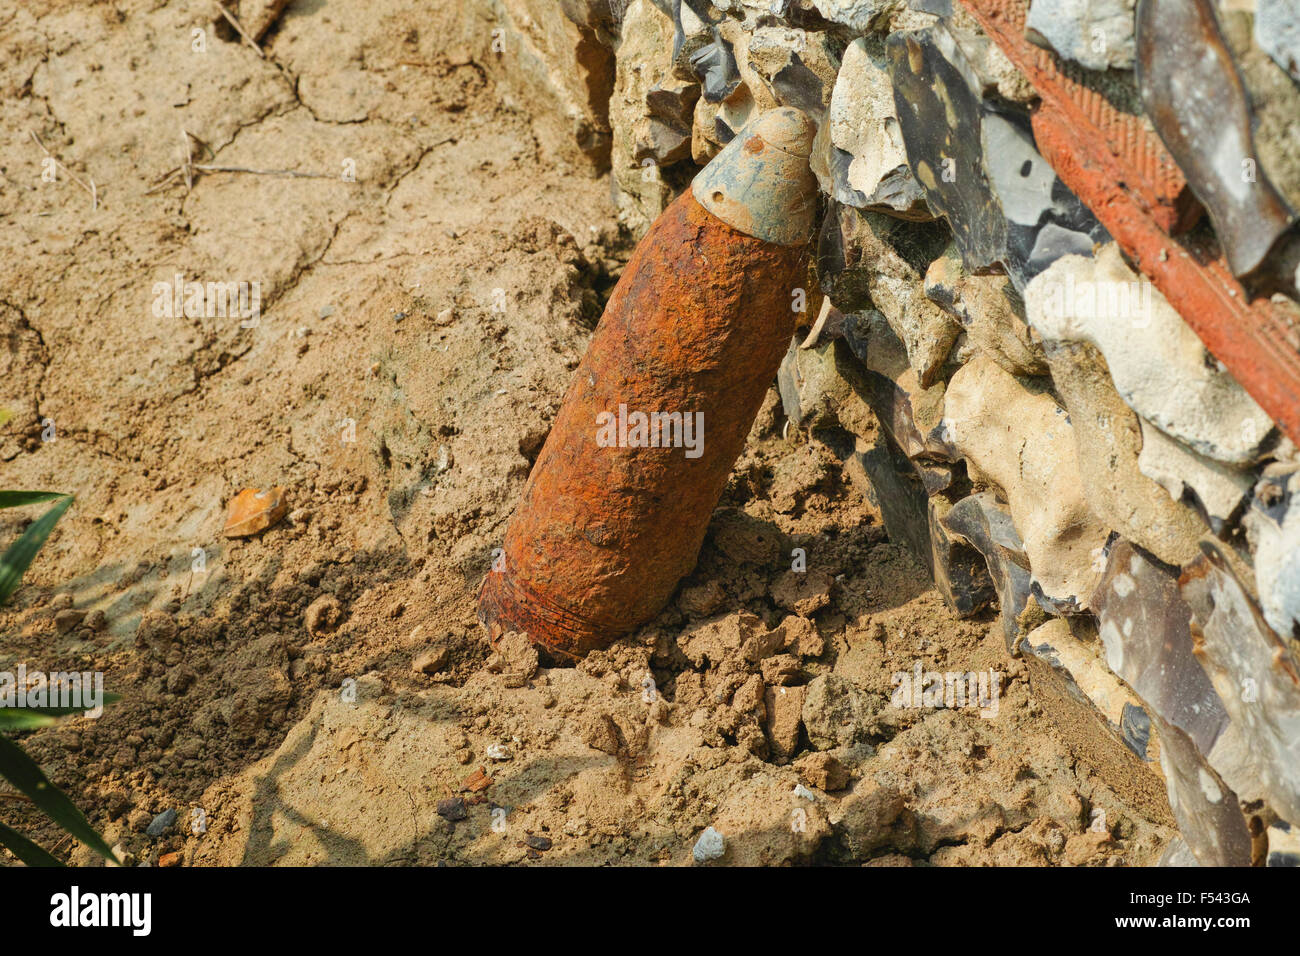 WWI British artillery shell left for disposal on a field in France in the area of the Battle of the Somme 1916 Stock Photo